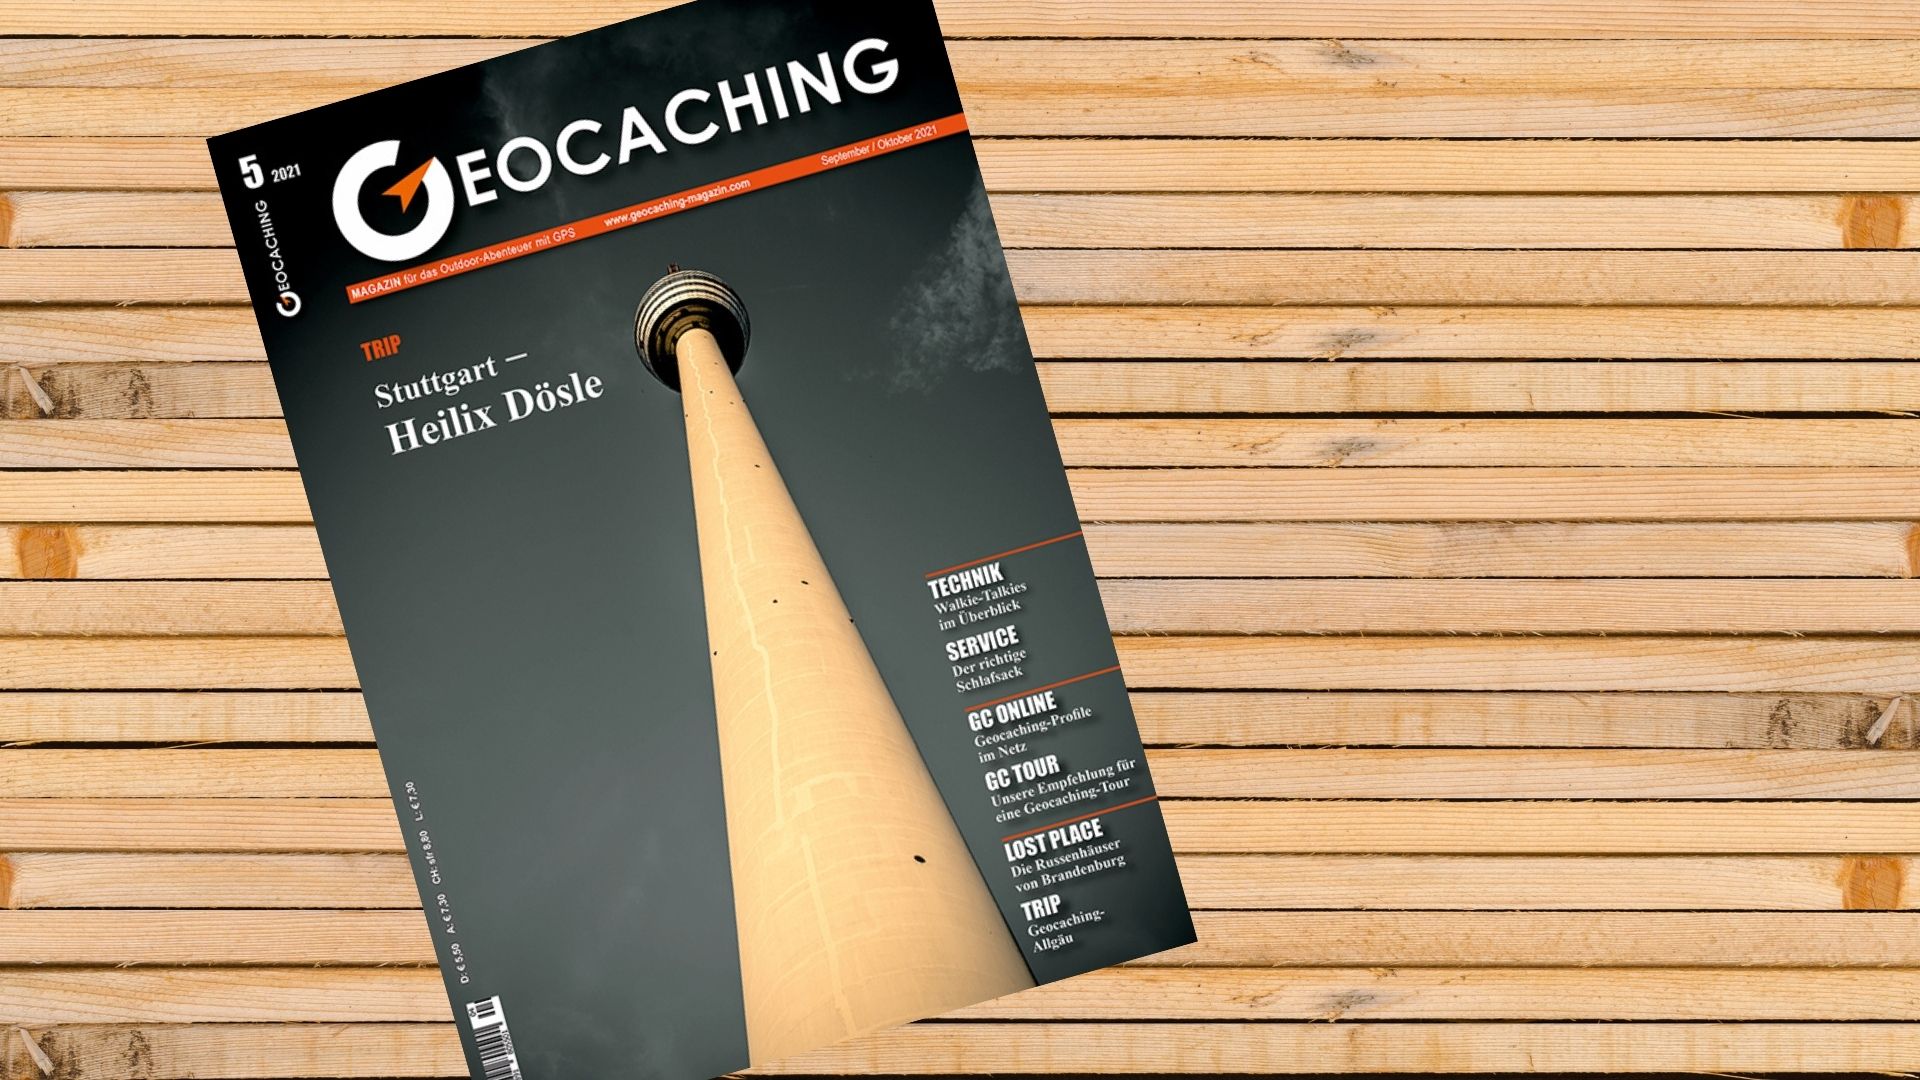 You are currently viewing Geocaching Magazin September/Oktober 2021